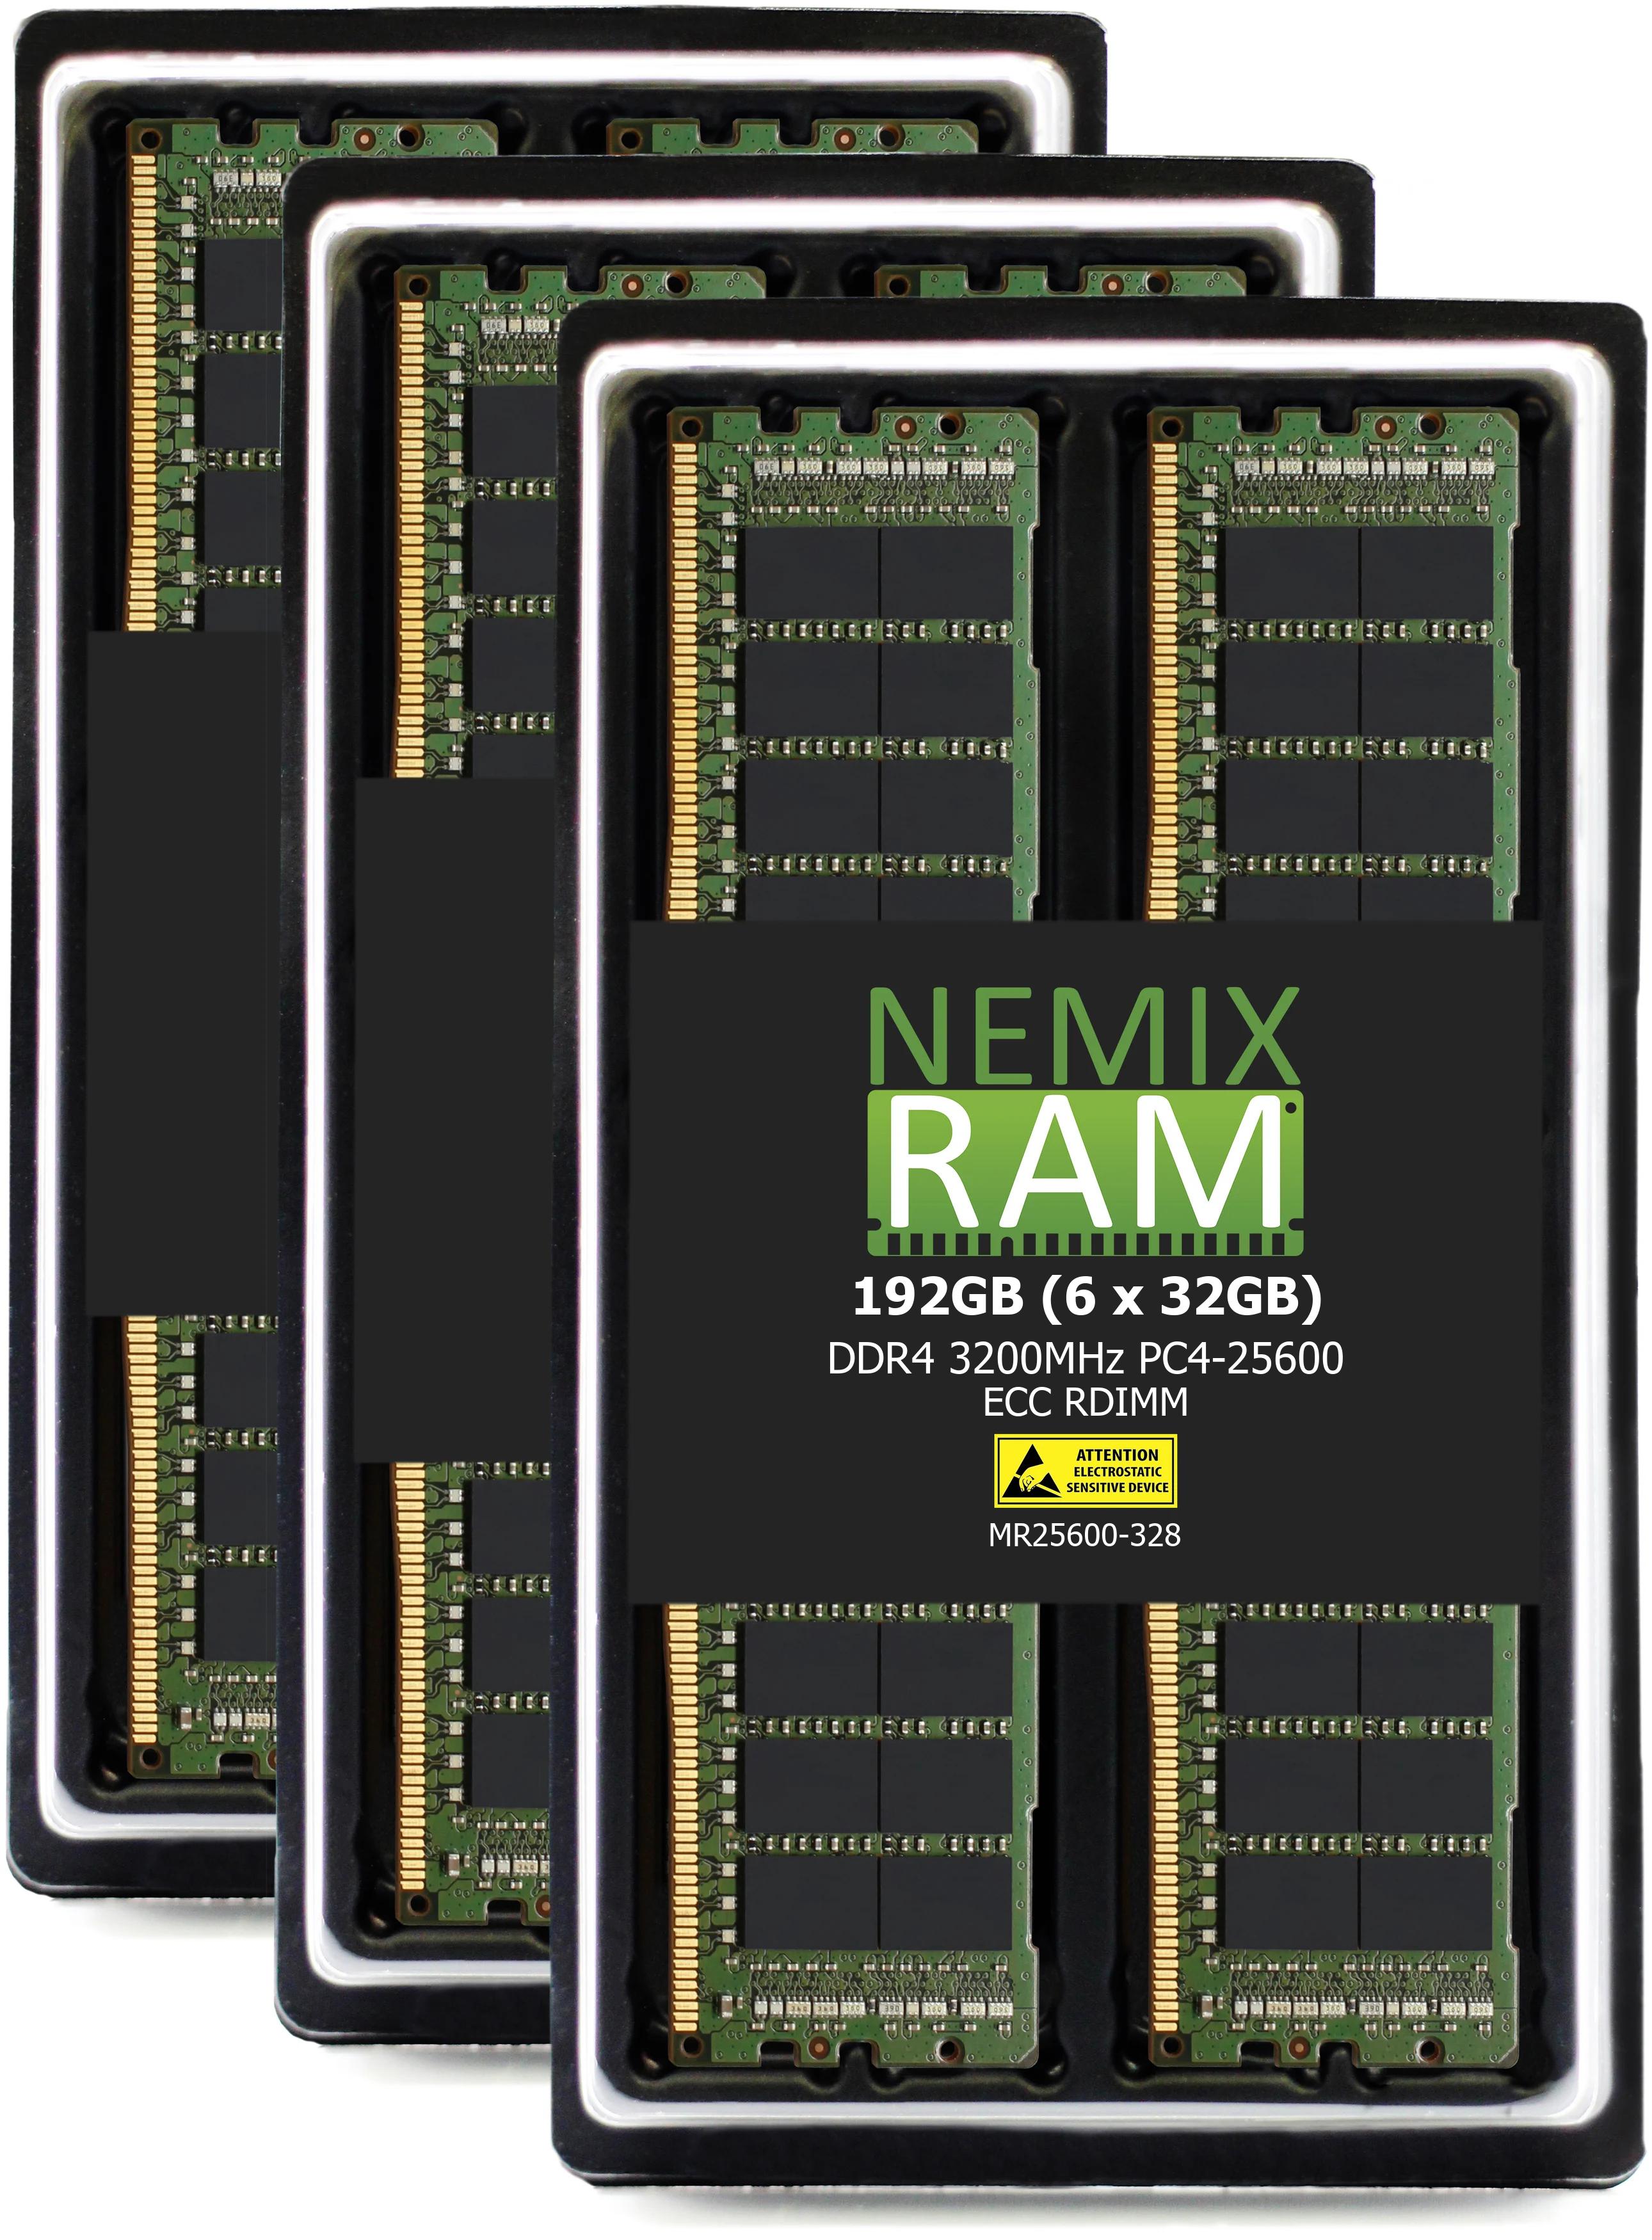 THINKMATE - GPX-WS-540RTP|GPX-WS-740RTP|GPX-WS-760S1 Workstations Memory Upgrade